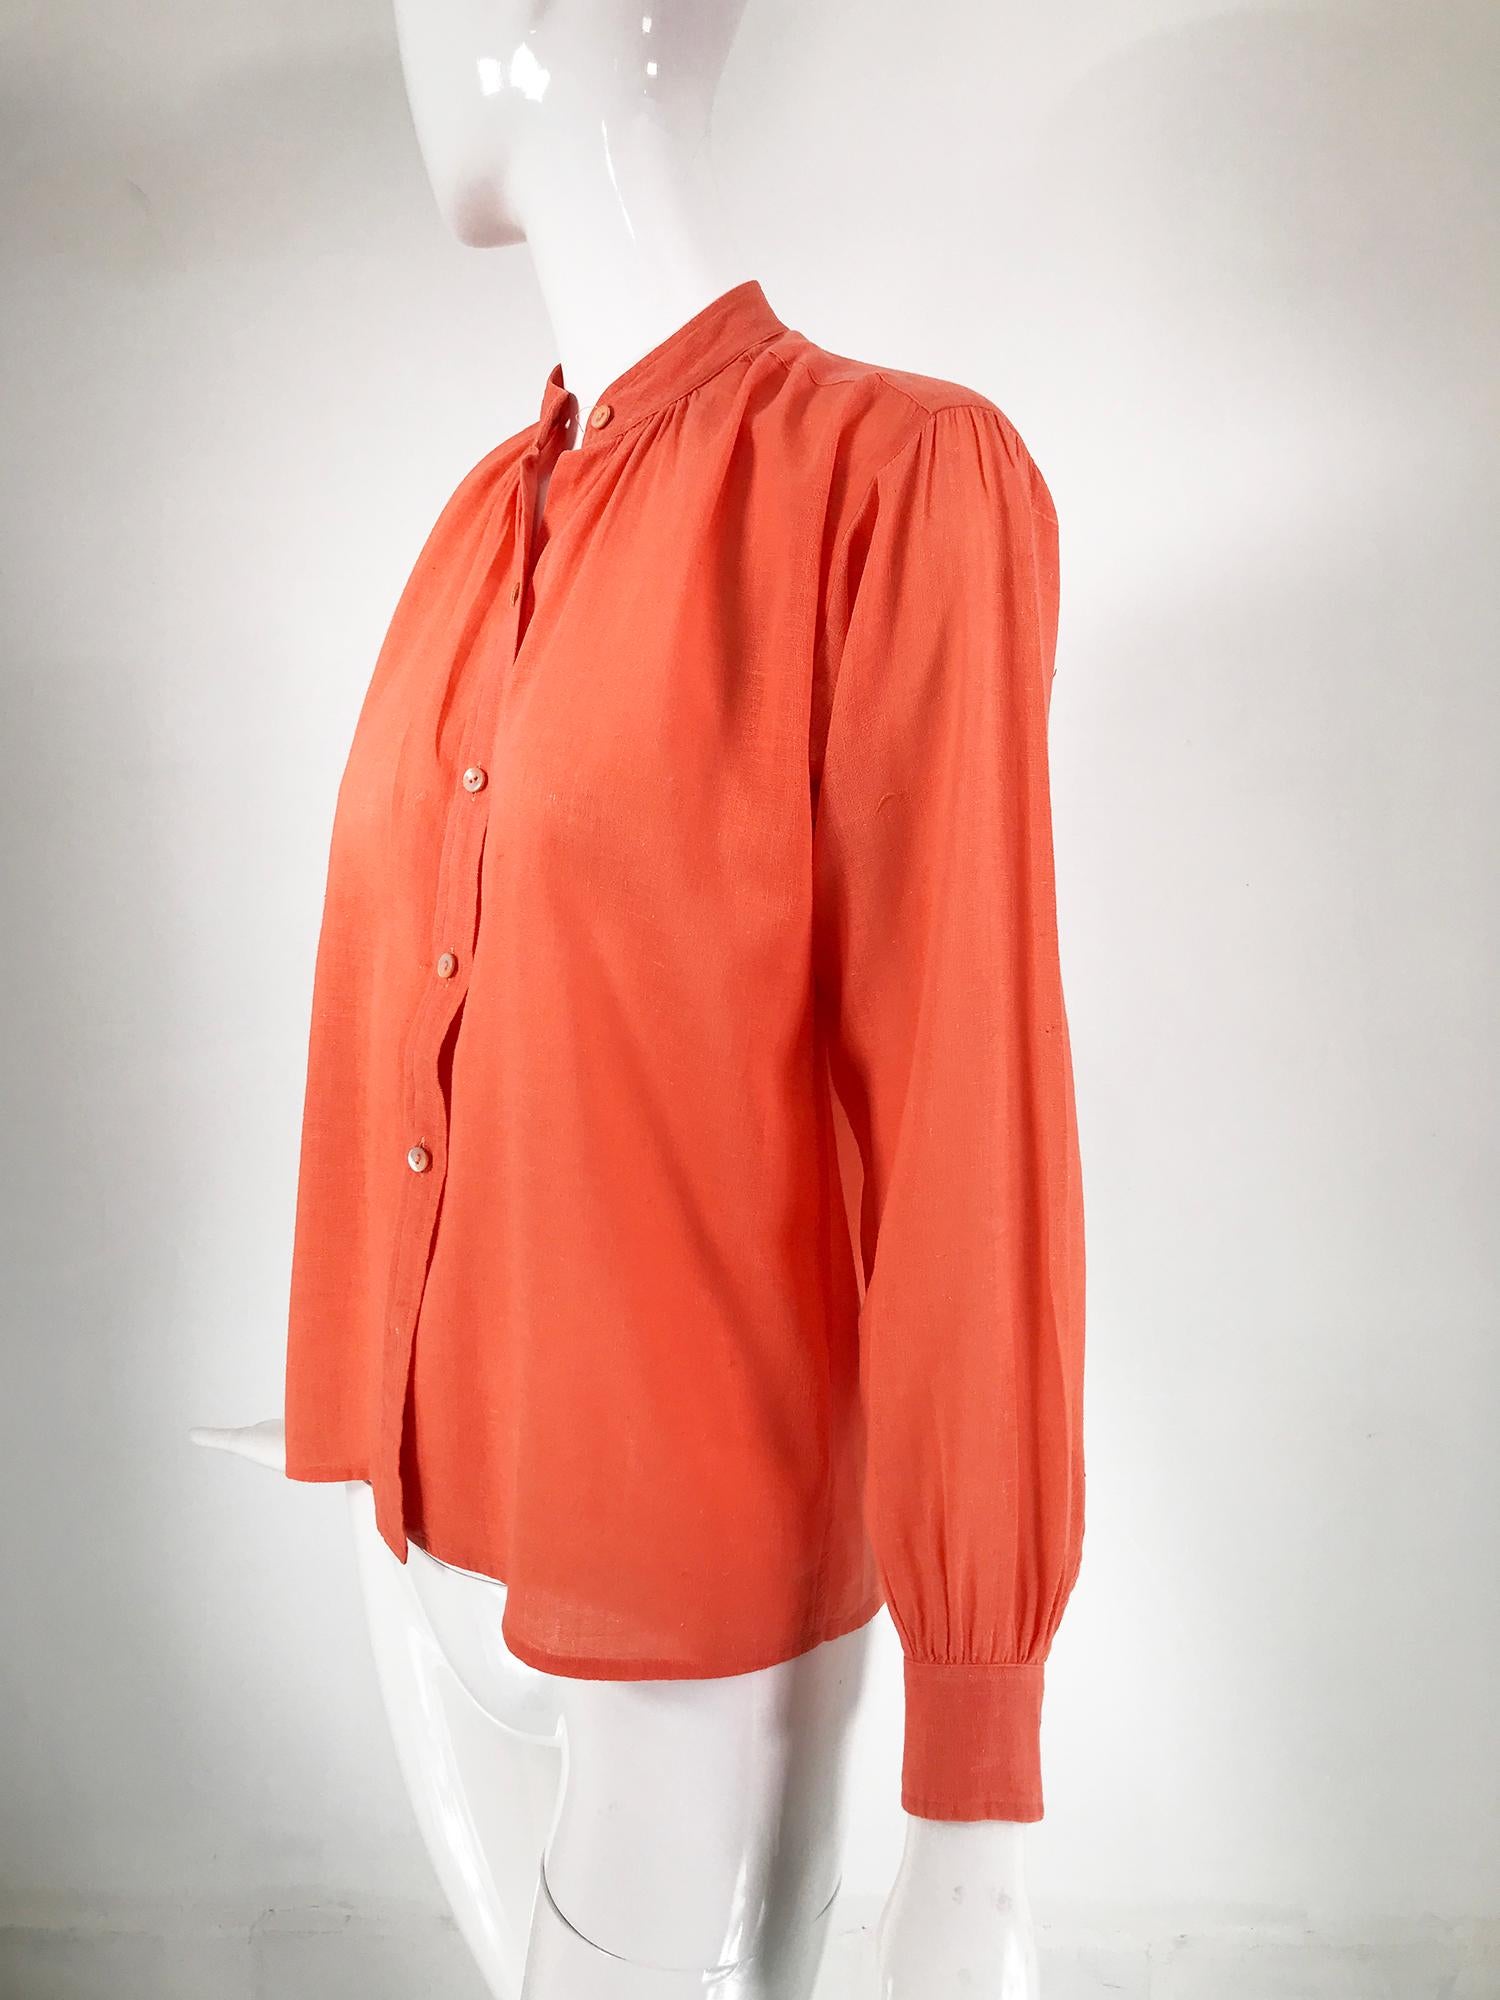 Yves Saint Laurent Rive Gauche orange cotton gauze bouse from the 1960s. Classic Yves Saint Laurent blouse has a band collar, shoulder yoke front and back with slight gathers, under arm gussets. Long sleeves with band buttons cuffs. The blouse